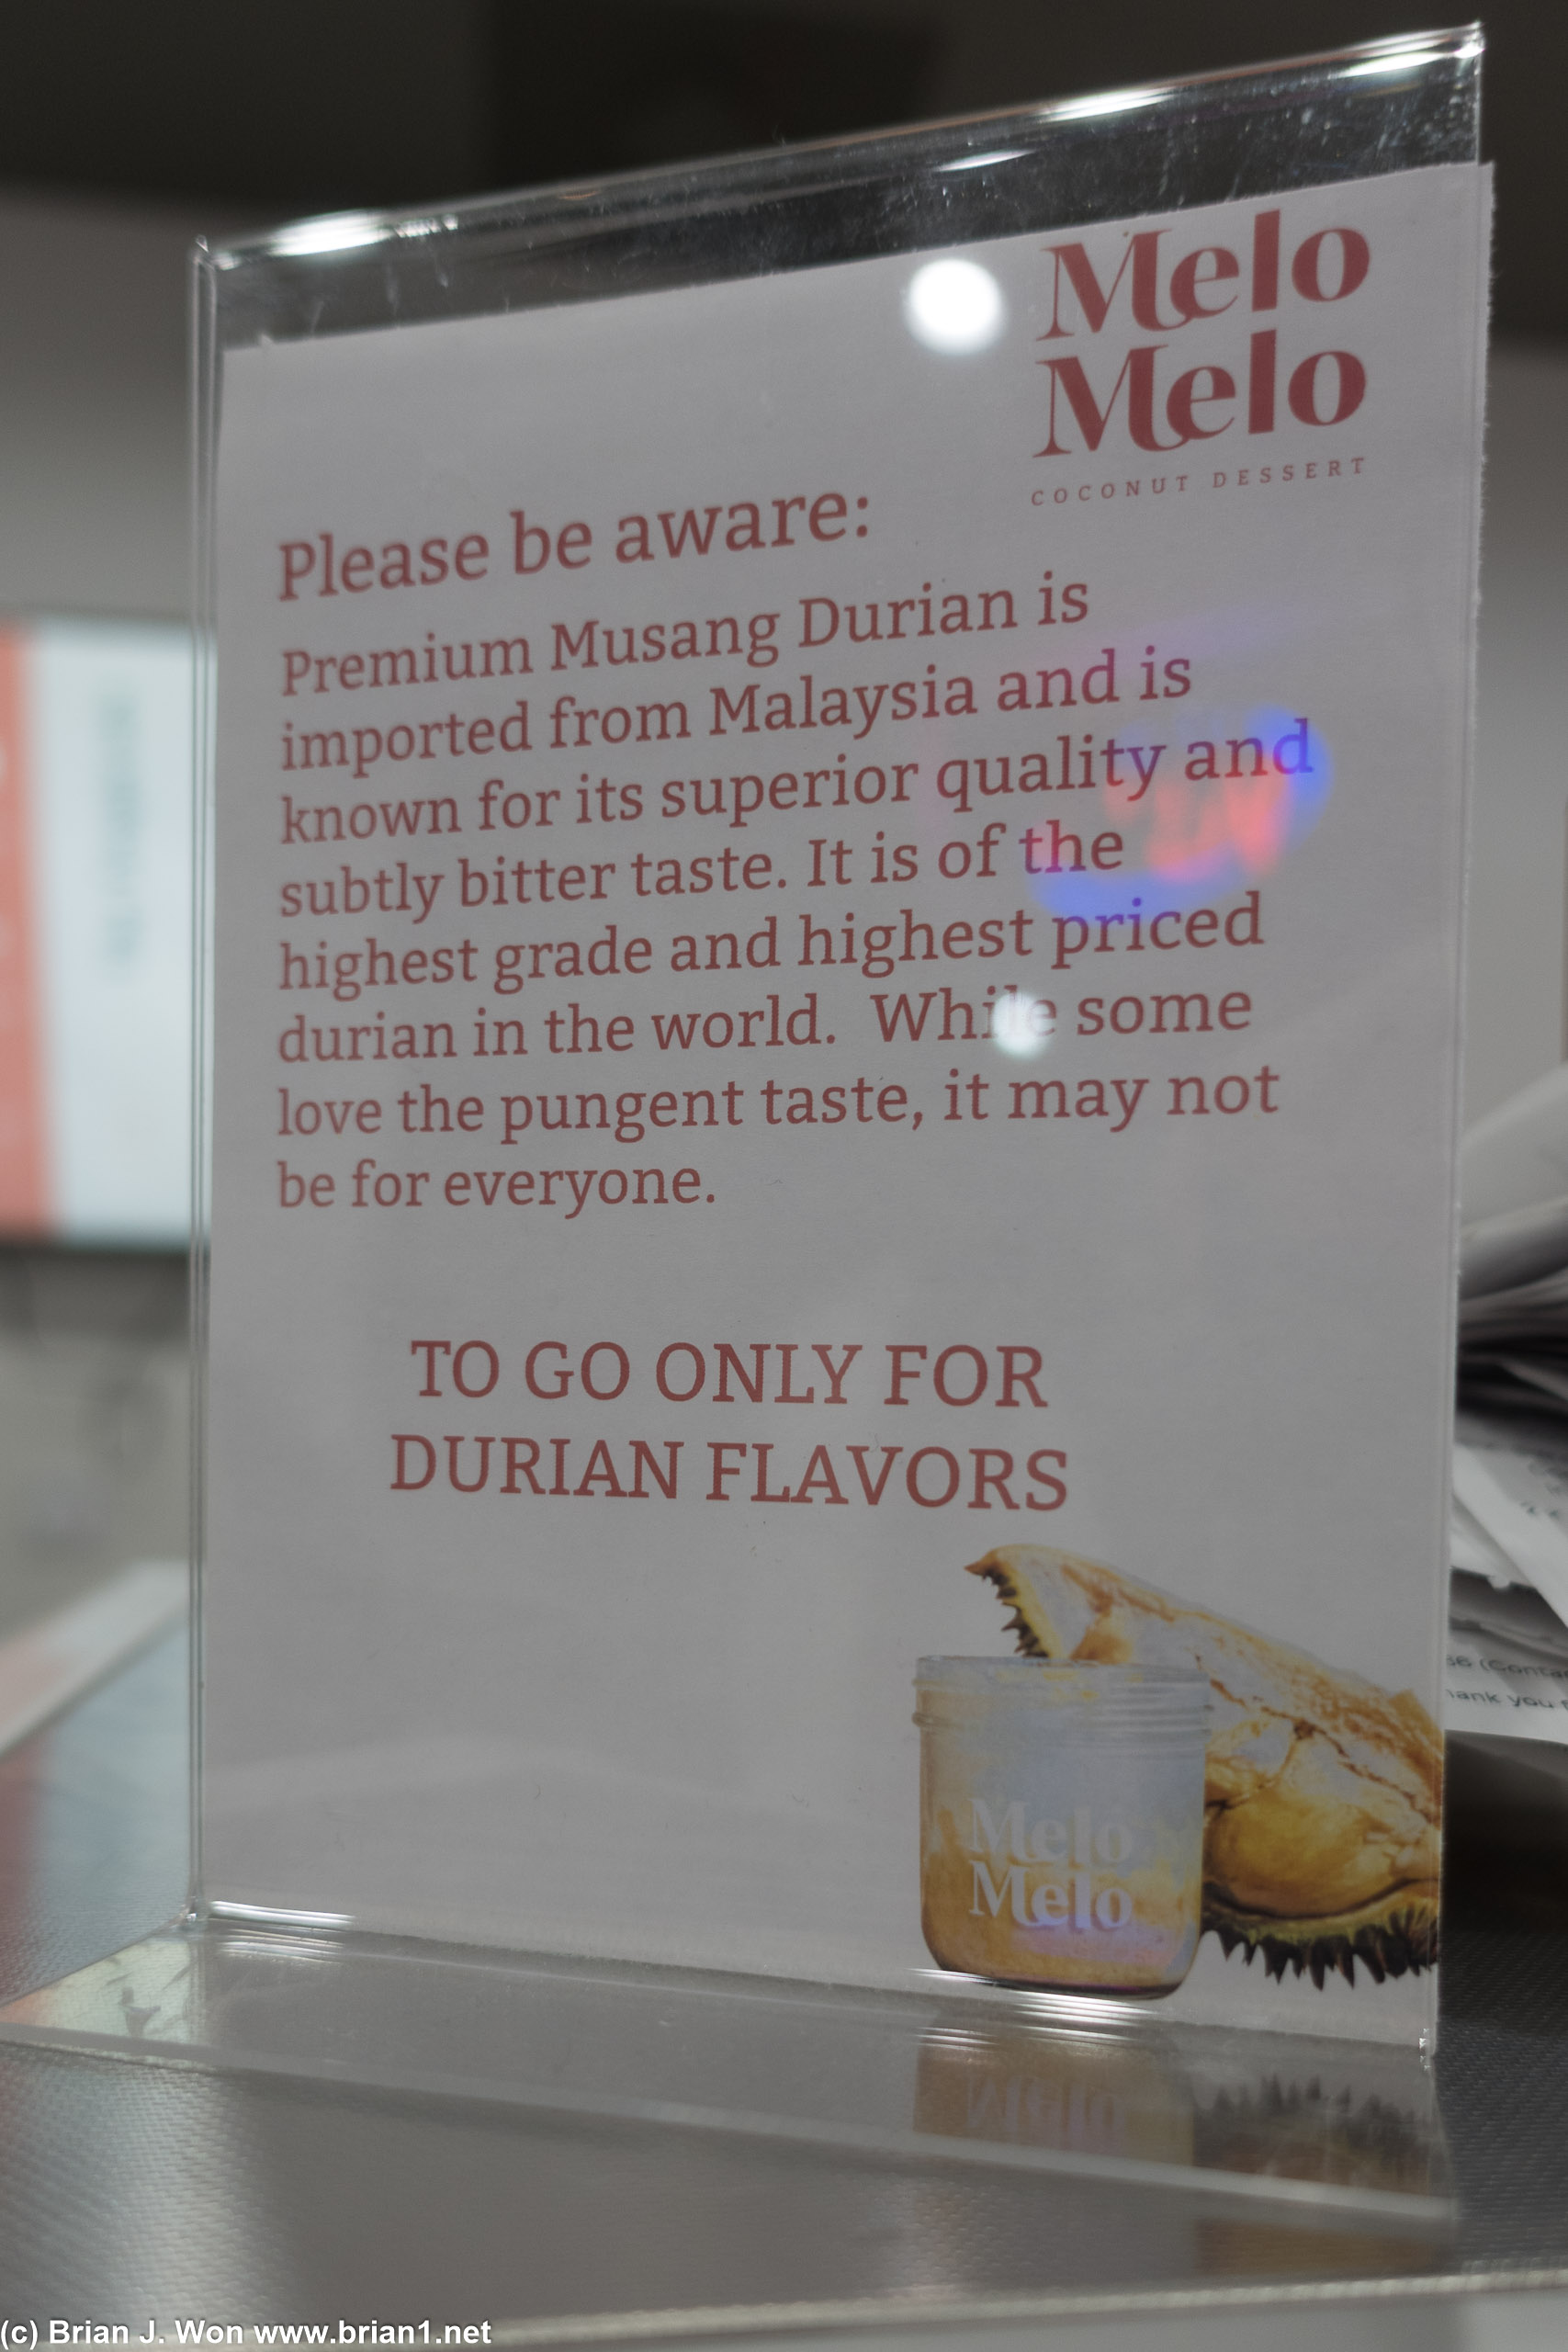 Durian flavors are TO GO only.